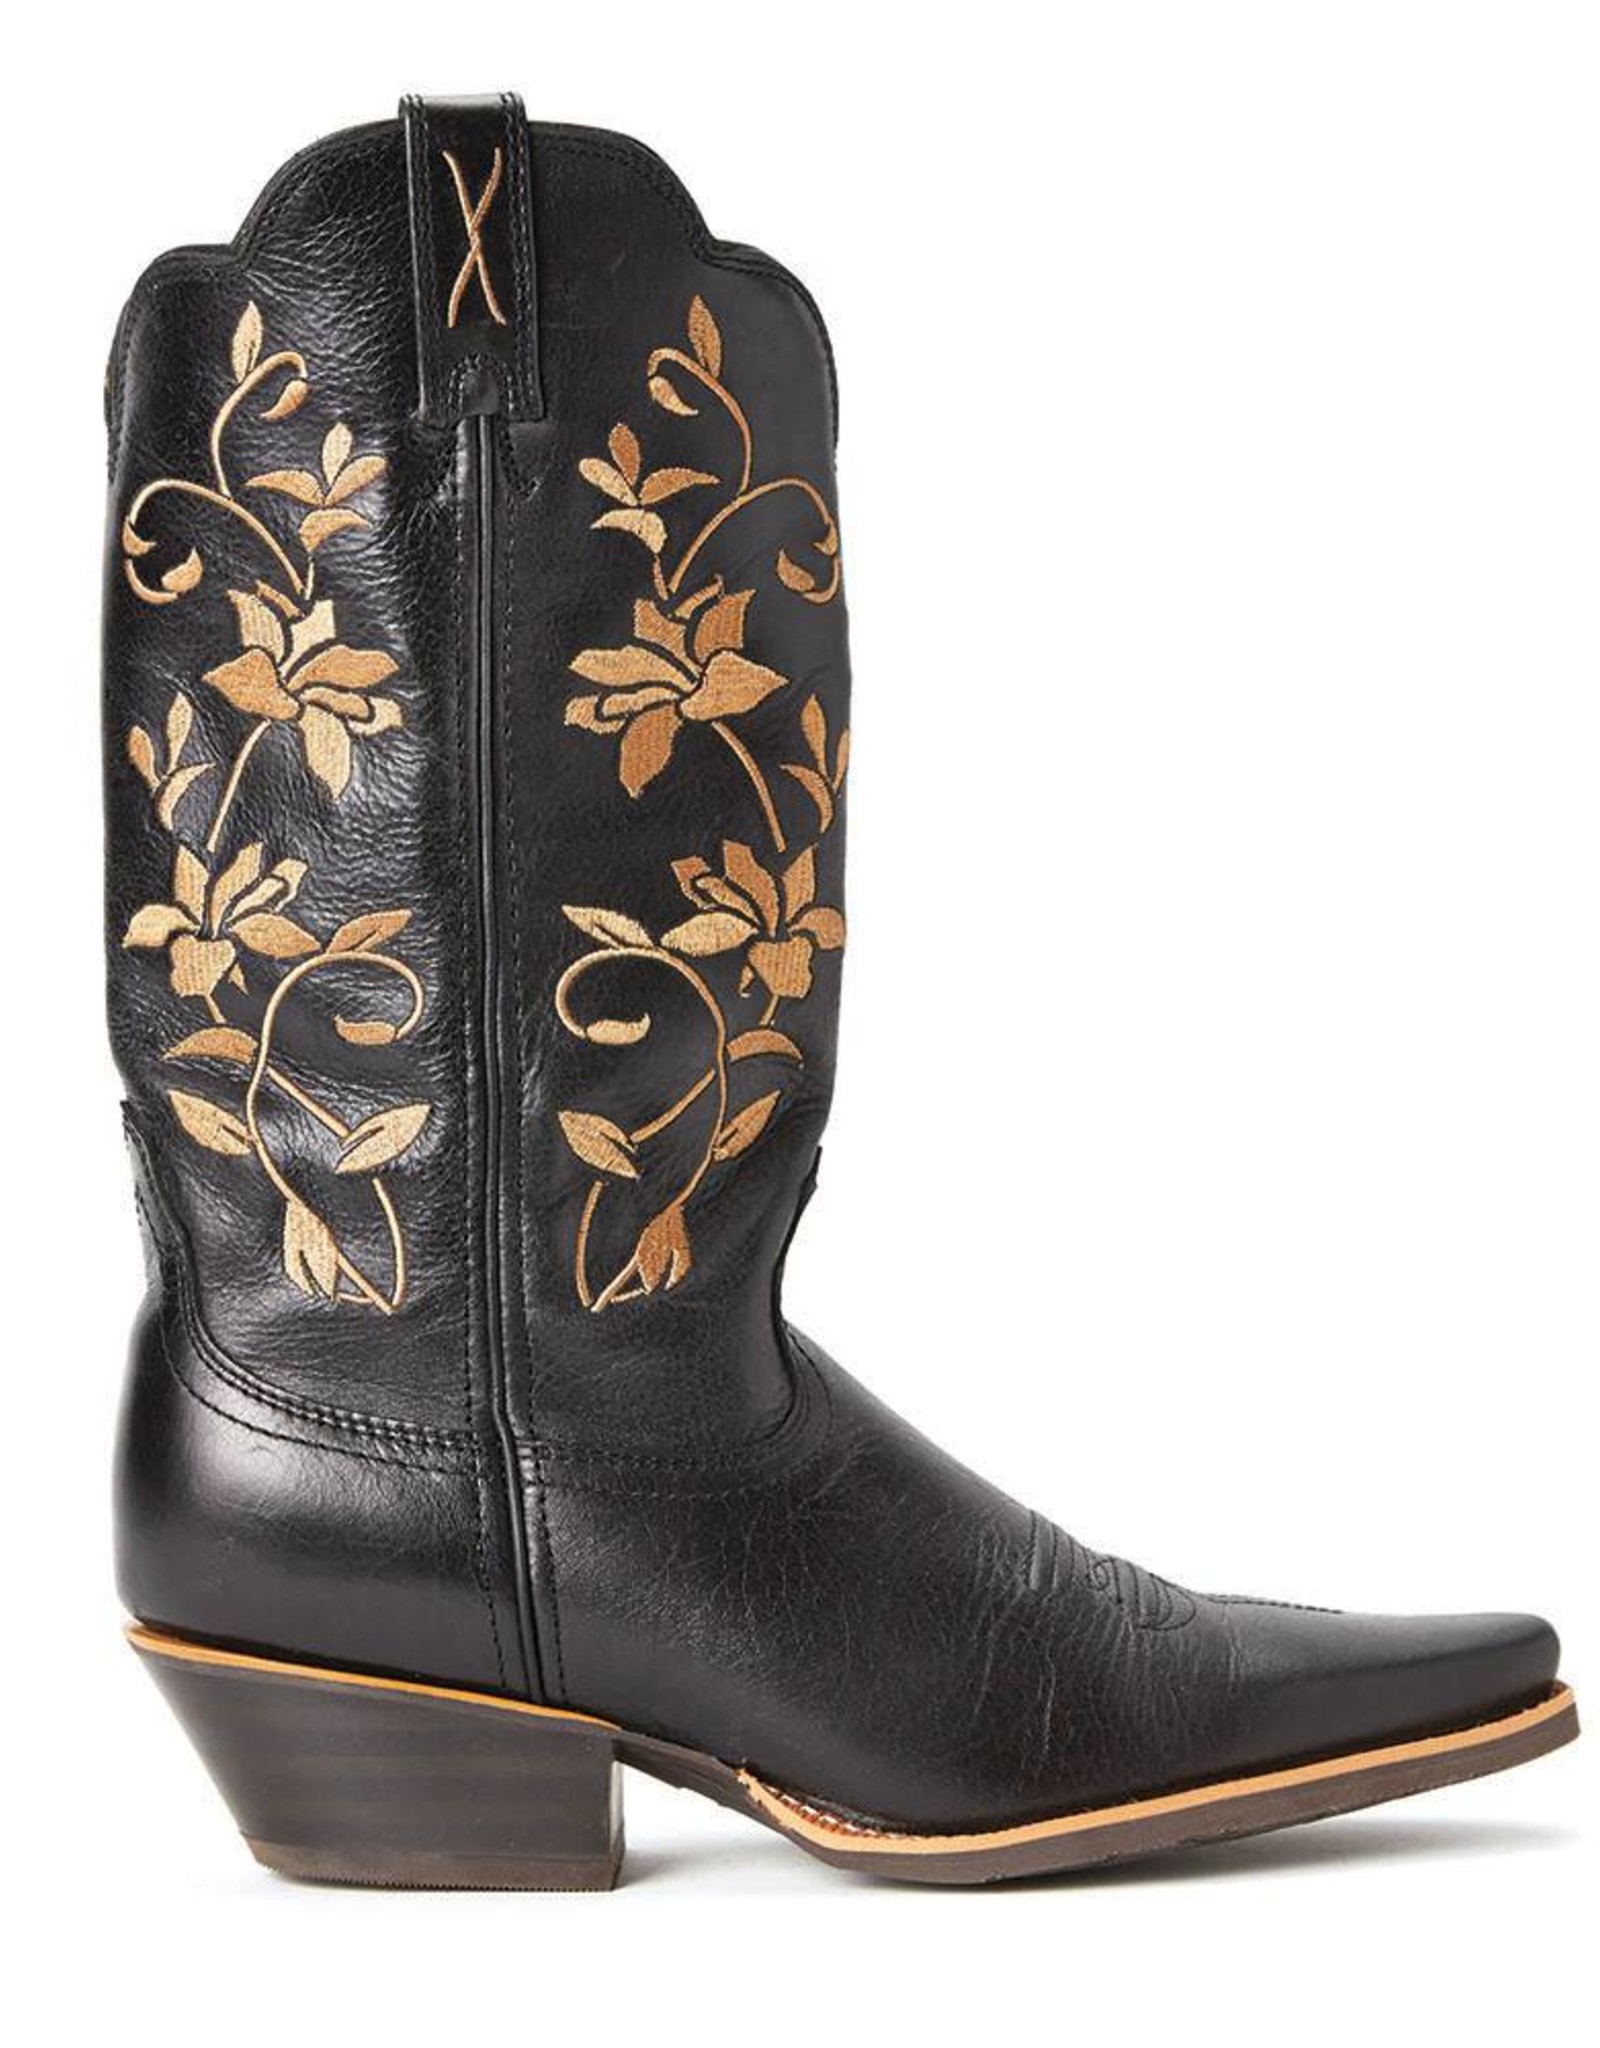 Twisted X Twisted X Women's Western Boots Black Size 7.5